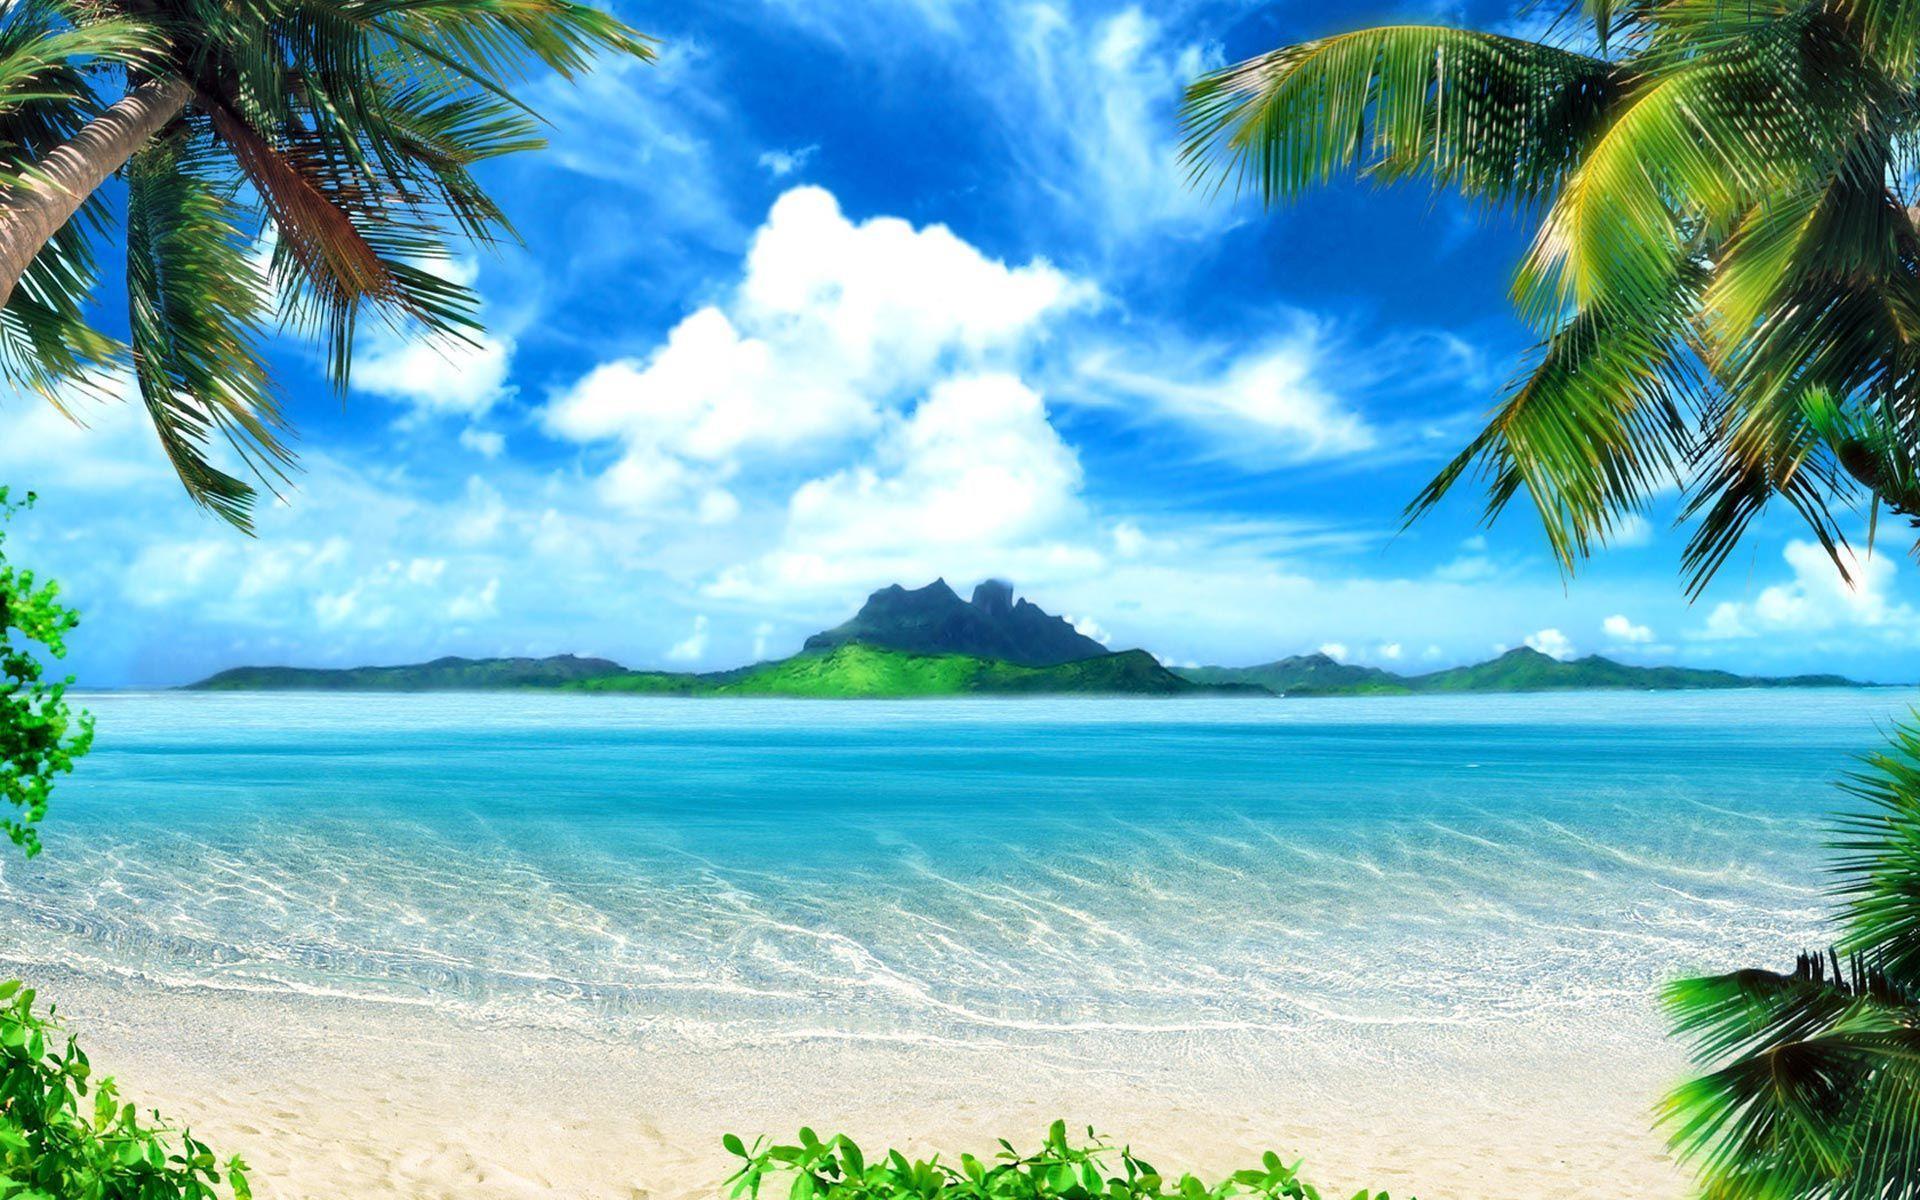 Summer Beach Picture Wallpaper HD Cool 7 HD Wallpaper. Hdimges